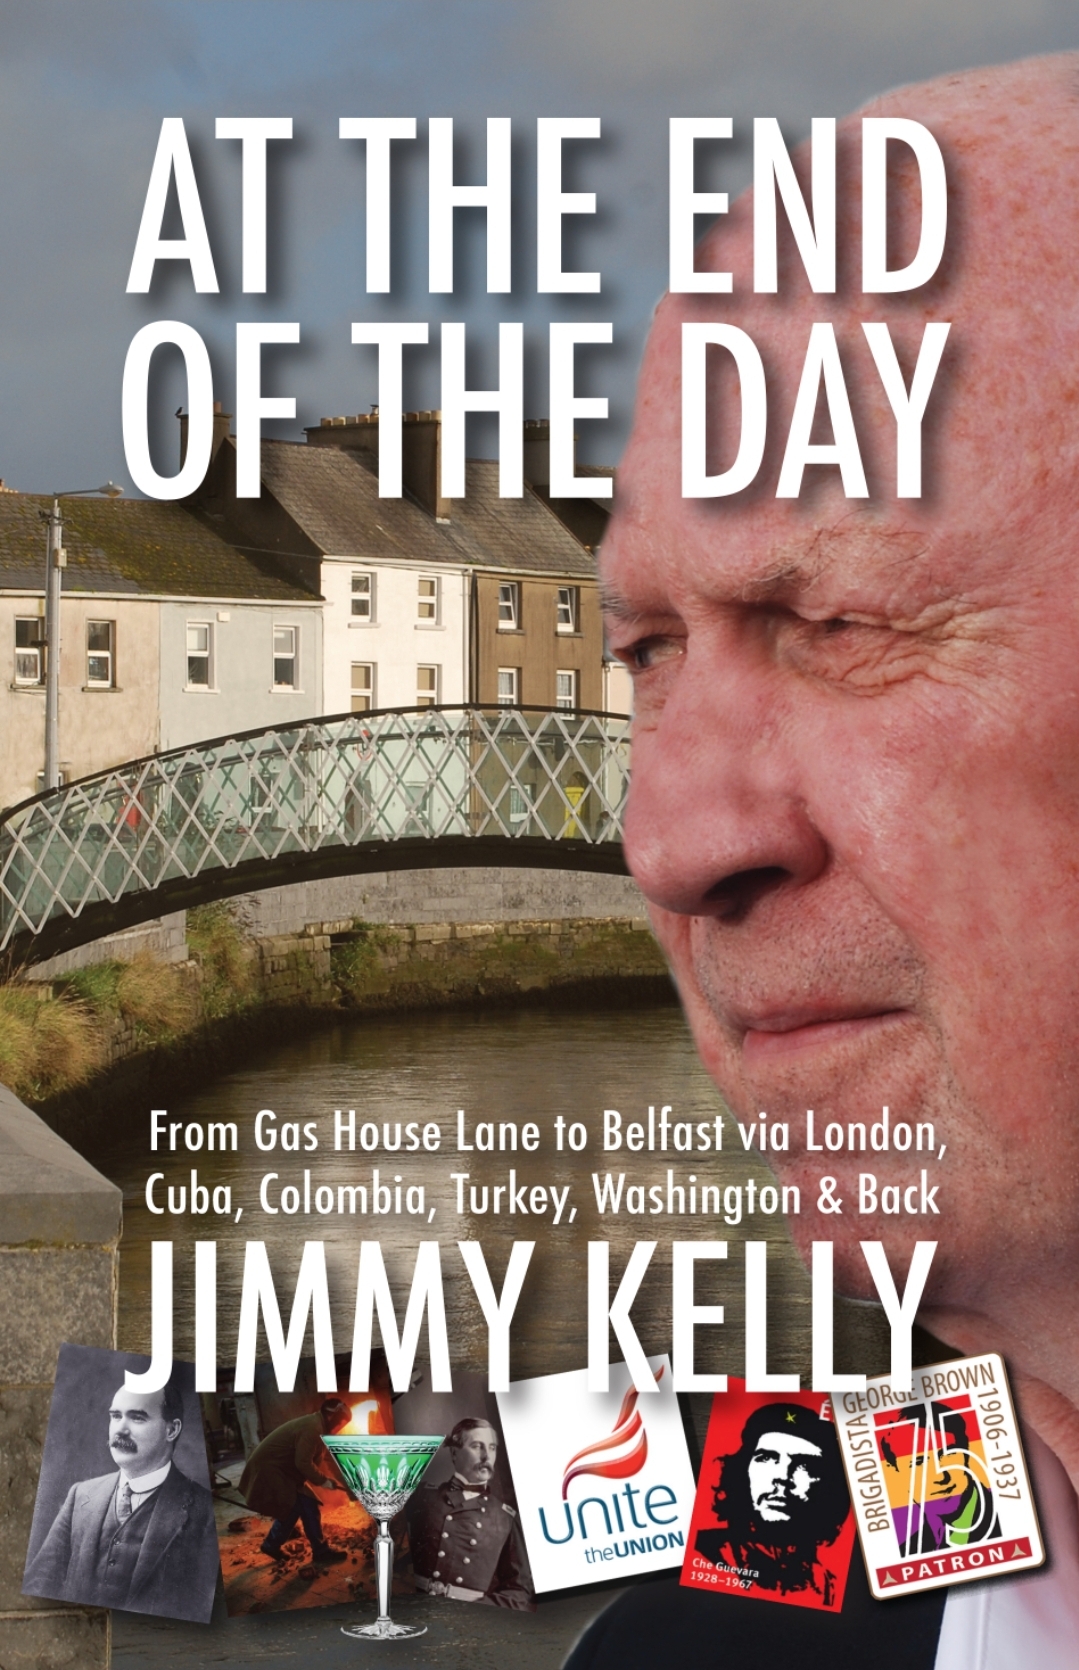 PRE-ORDER: AT THE END OF THE DAY by JIMMY KELLY